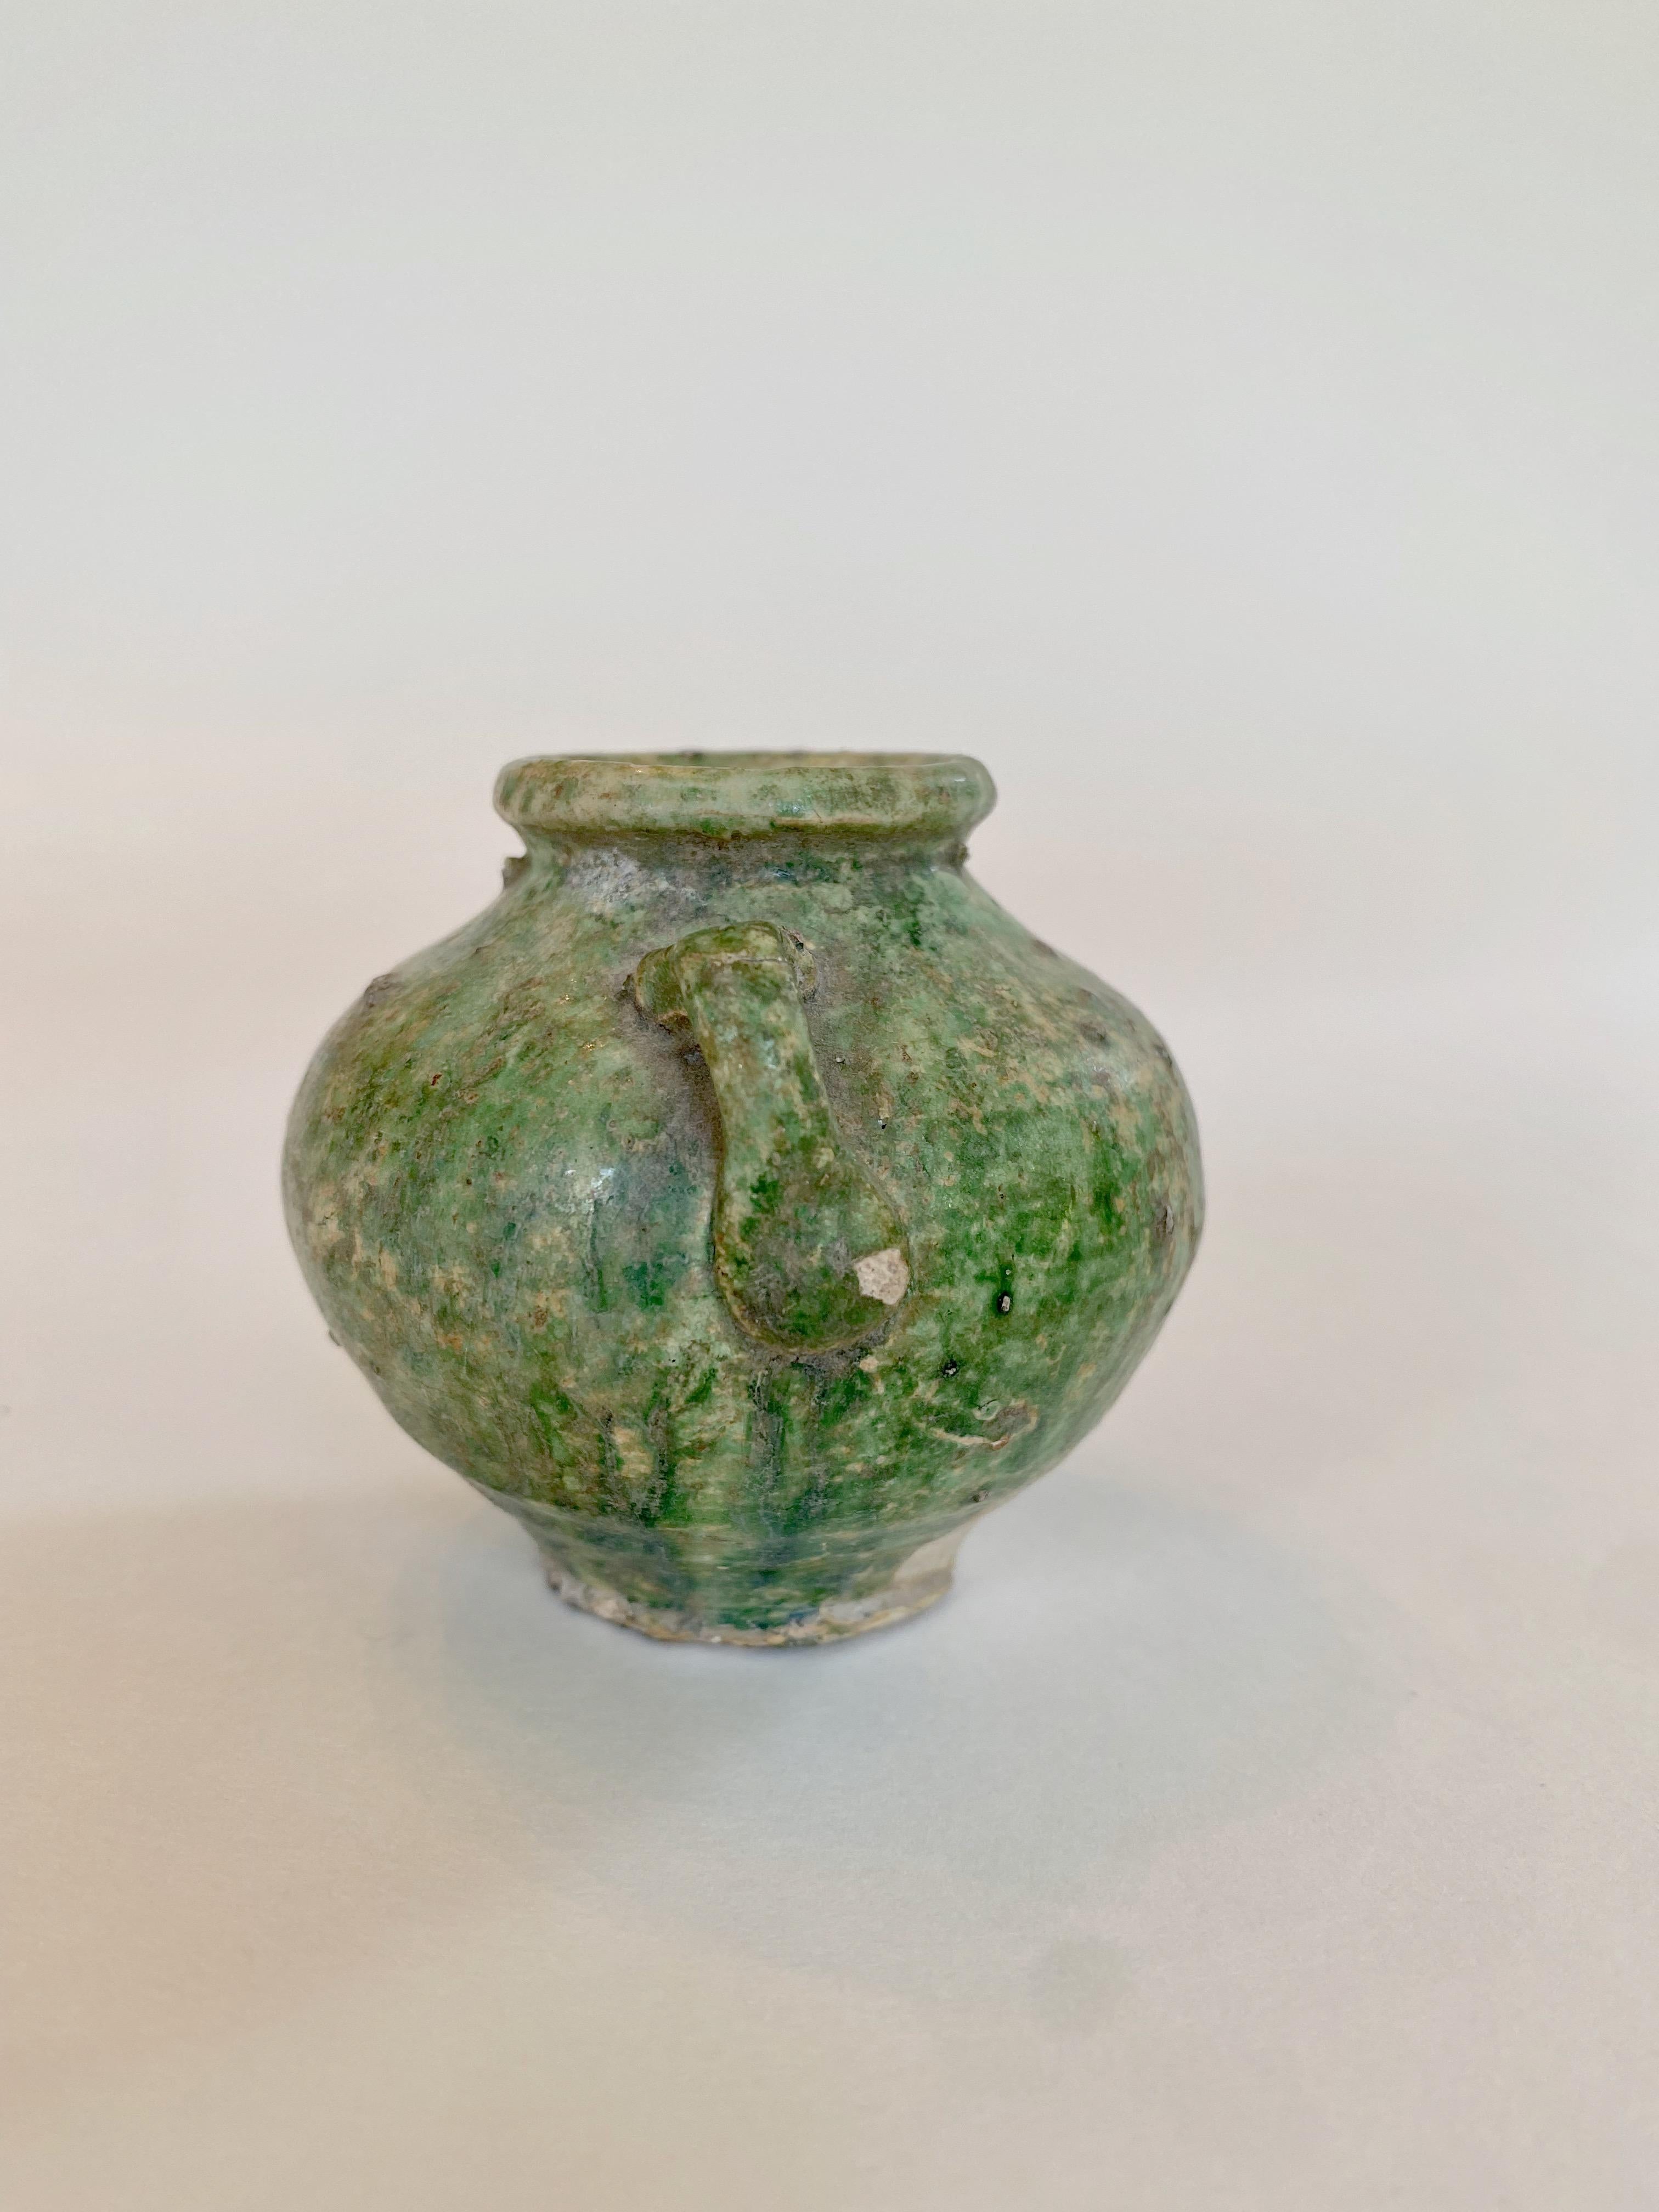 Small Ming pottery jarlet with handles and a green glaze. 16th century. 
This charming, somewhat rustic piece is like a miniature version of the large earthenware jars used to store water. It has a rounded body, small handles, and a pronounced lip.